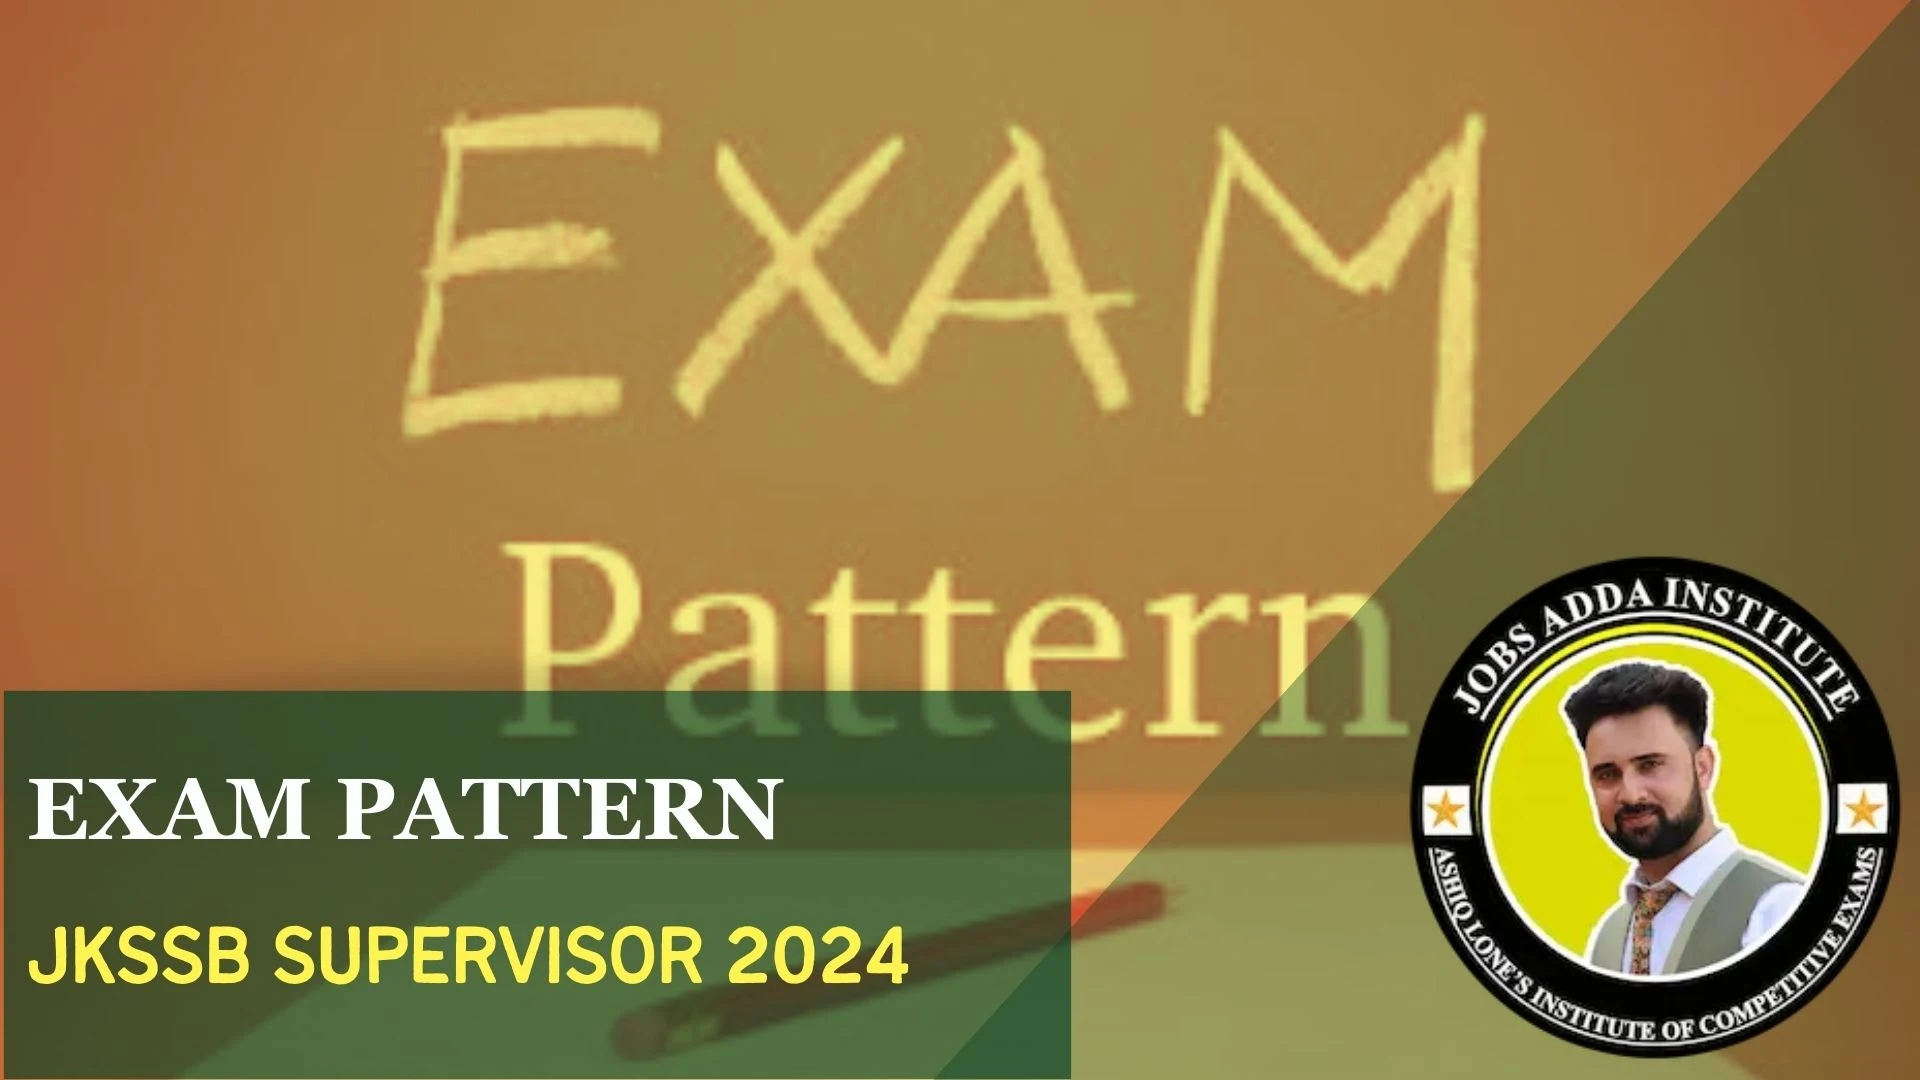 JKSSB Supervisor Exam Pattern 2024 100 Questions in 120 Minutes